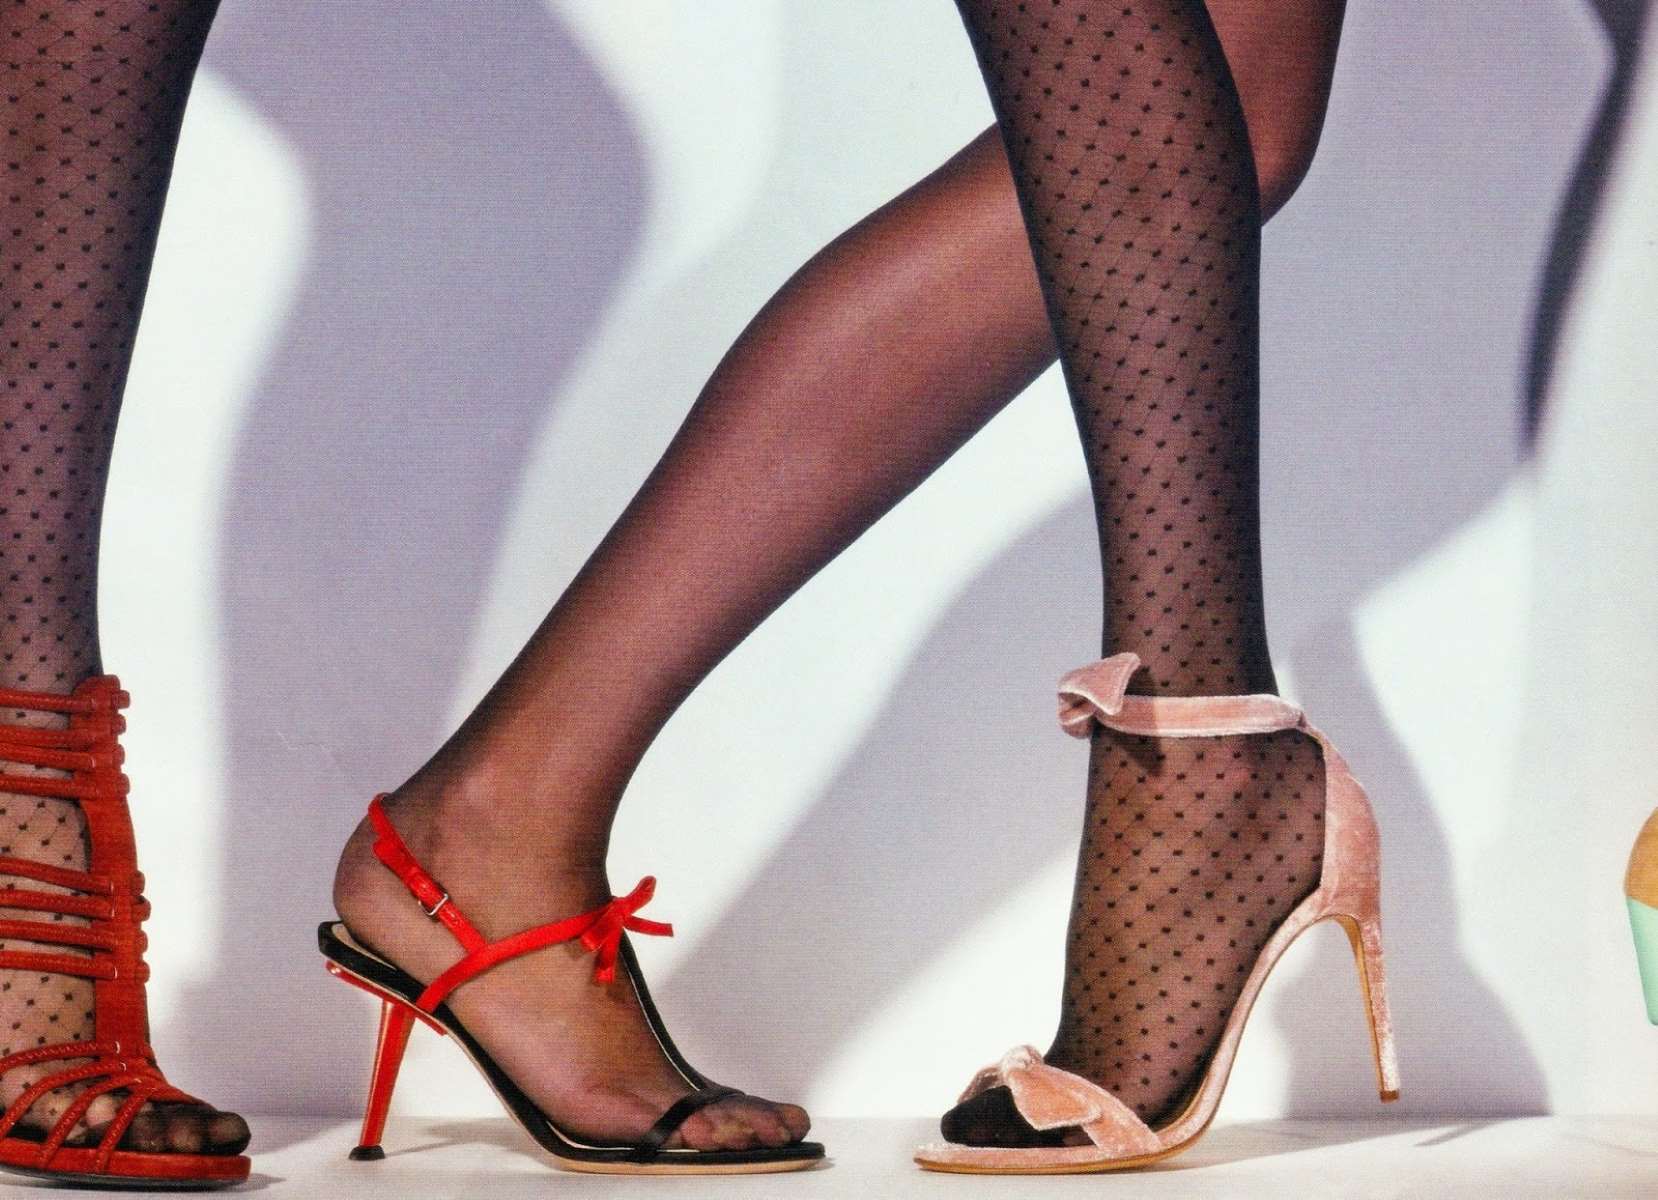 The Ultimate Fashion Hack: Rocking Open-Toed Shoes With Nylons And Heels